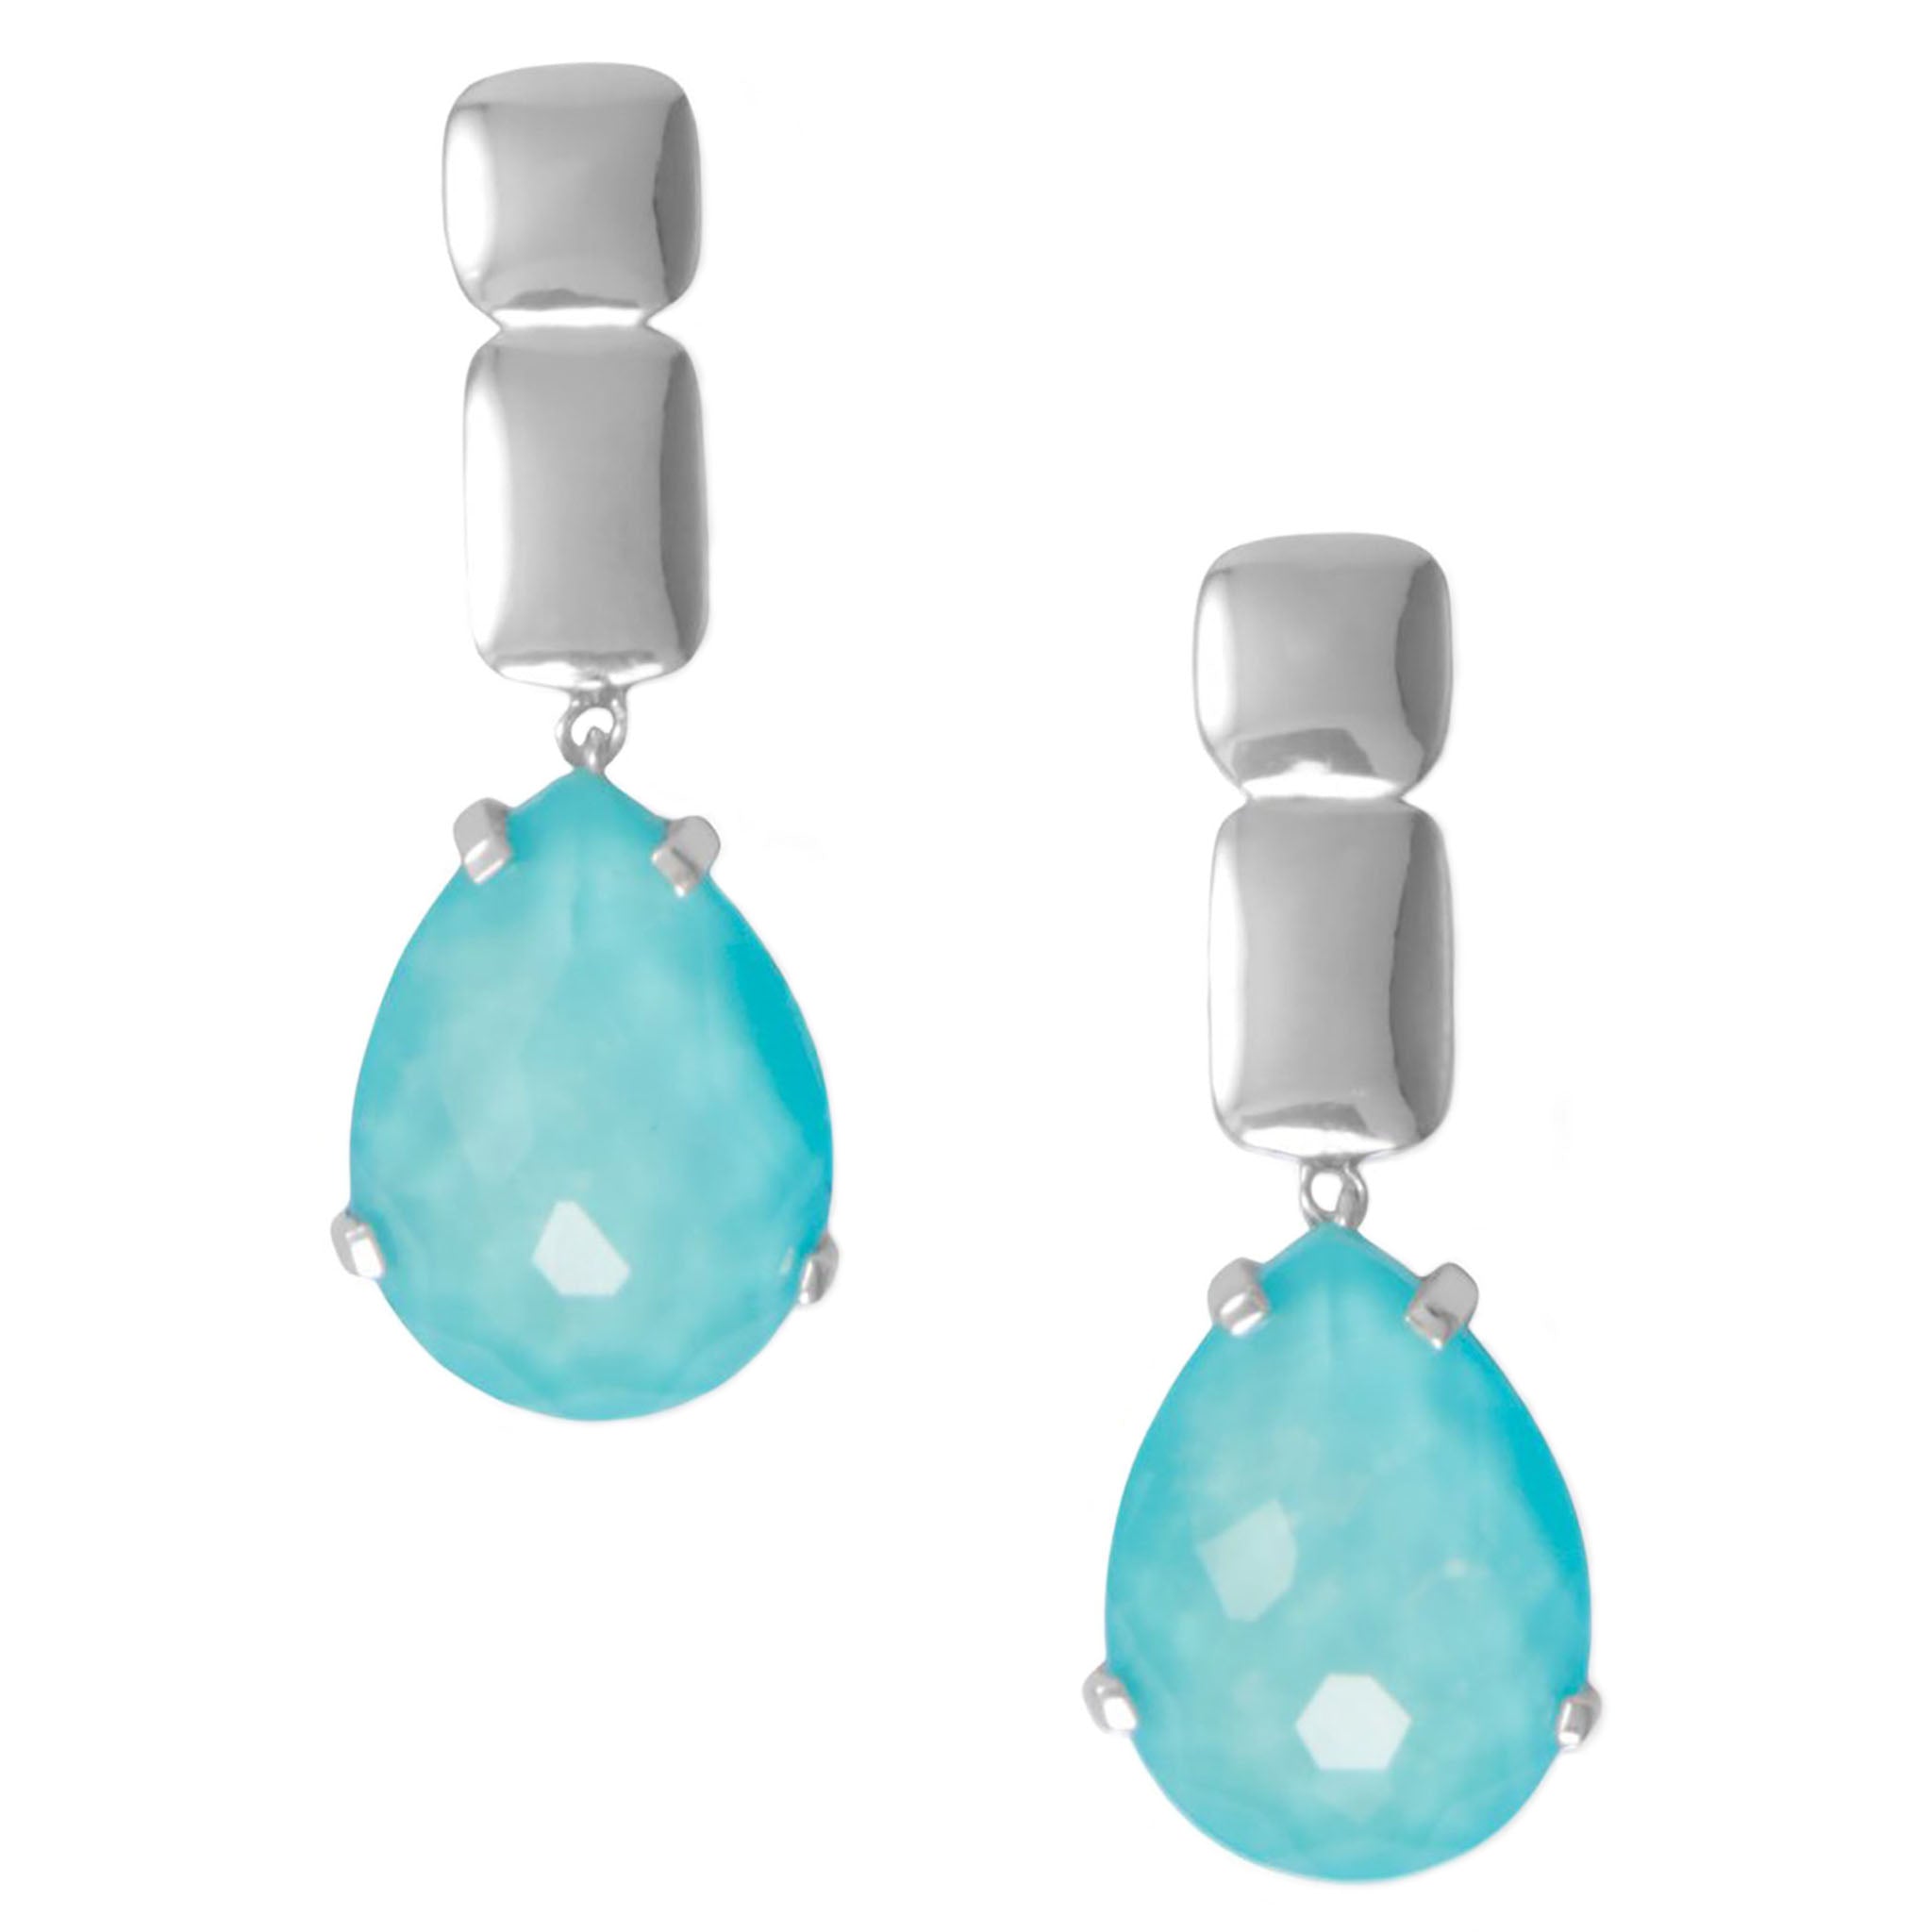 Turquoise and Quartz Doublet Earrings